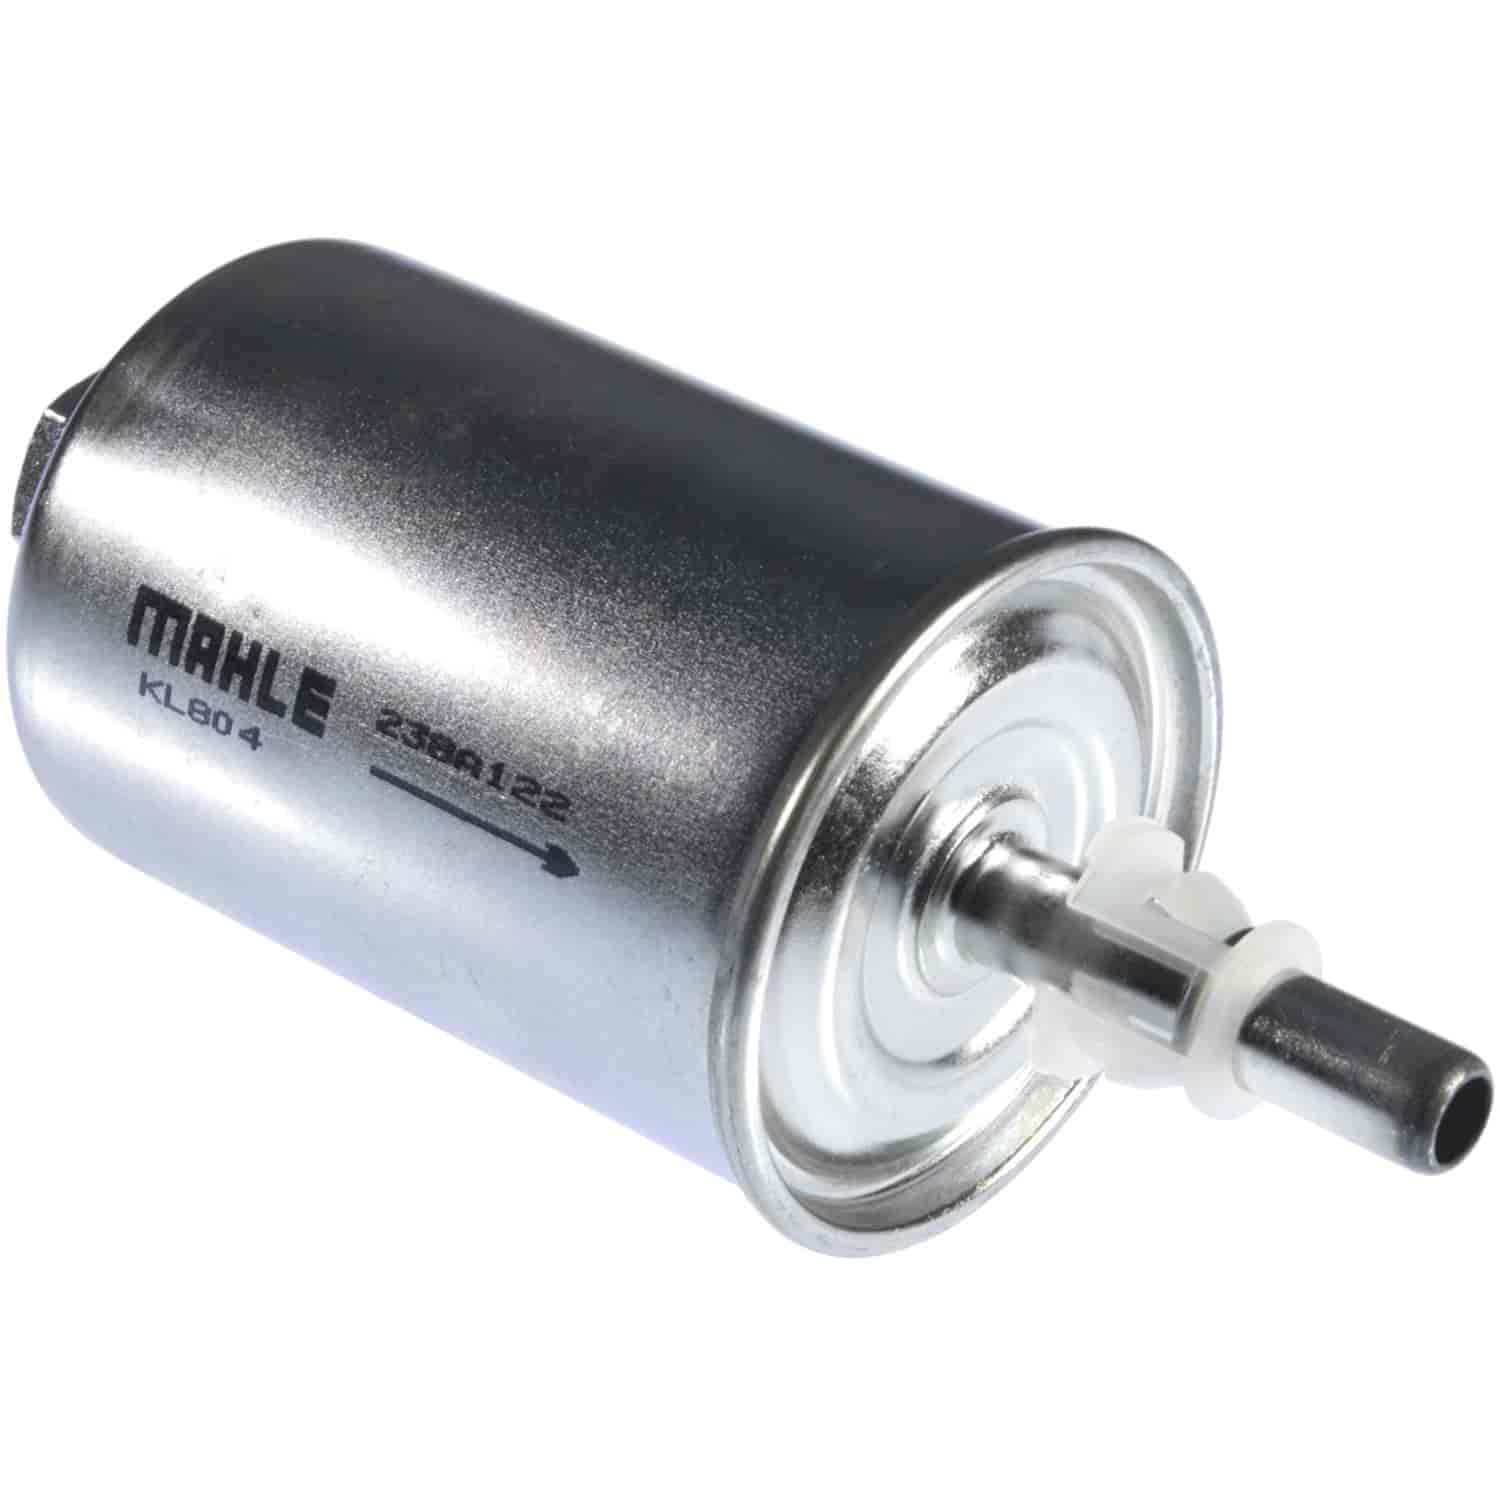 Mahle Fuel Filter 1994-2001 Various Chevy/GMC/Isuzu/Olds Truck/SUV